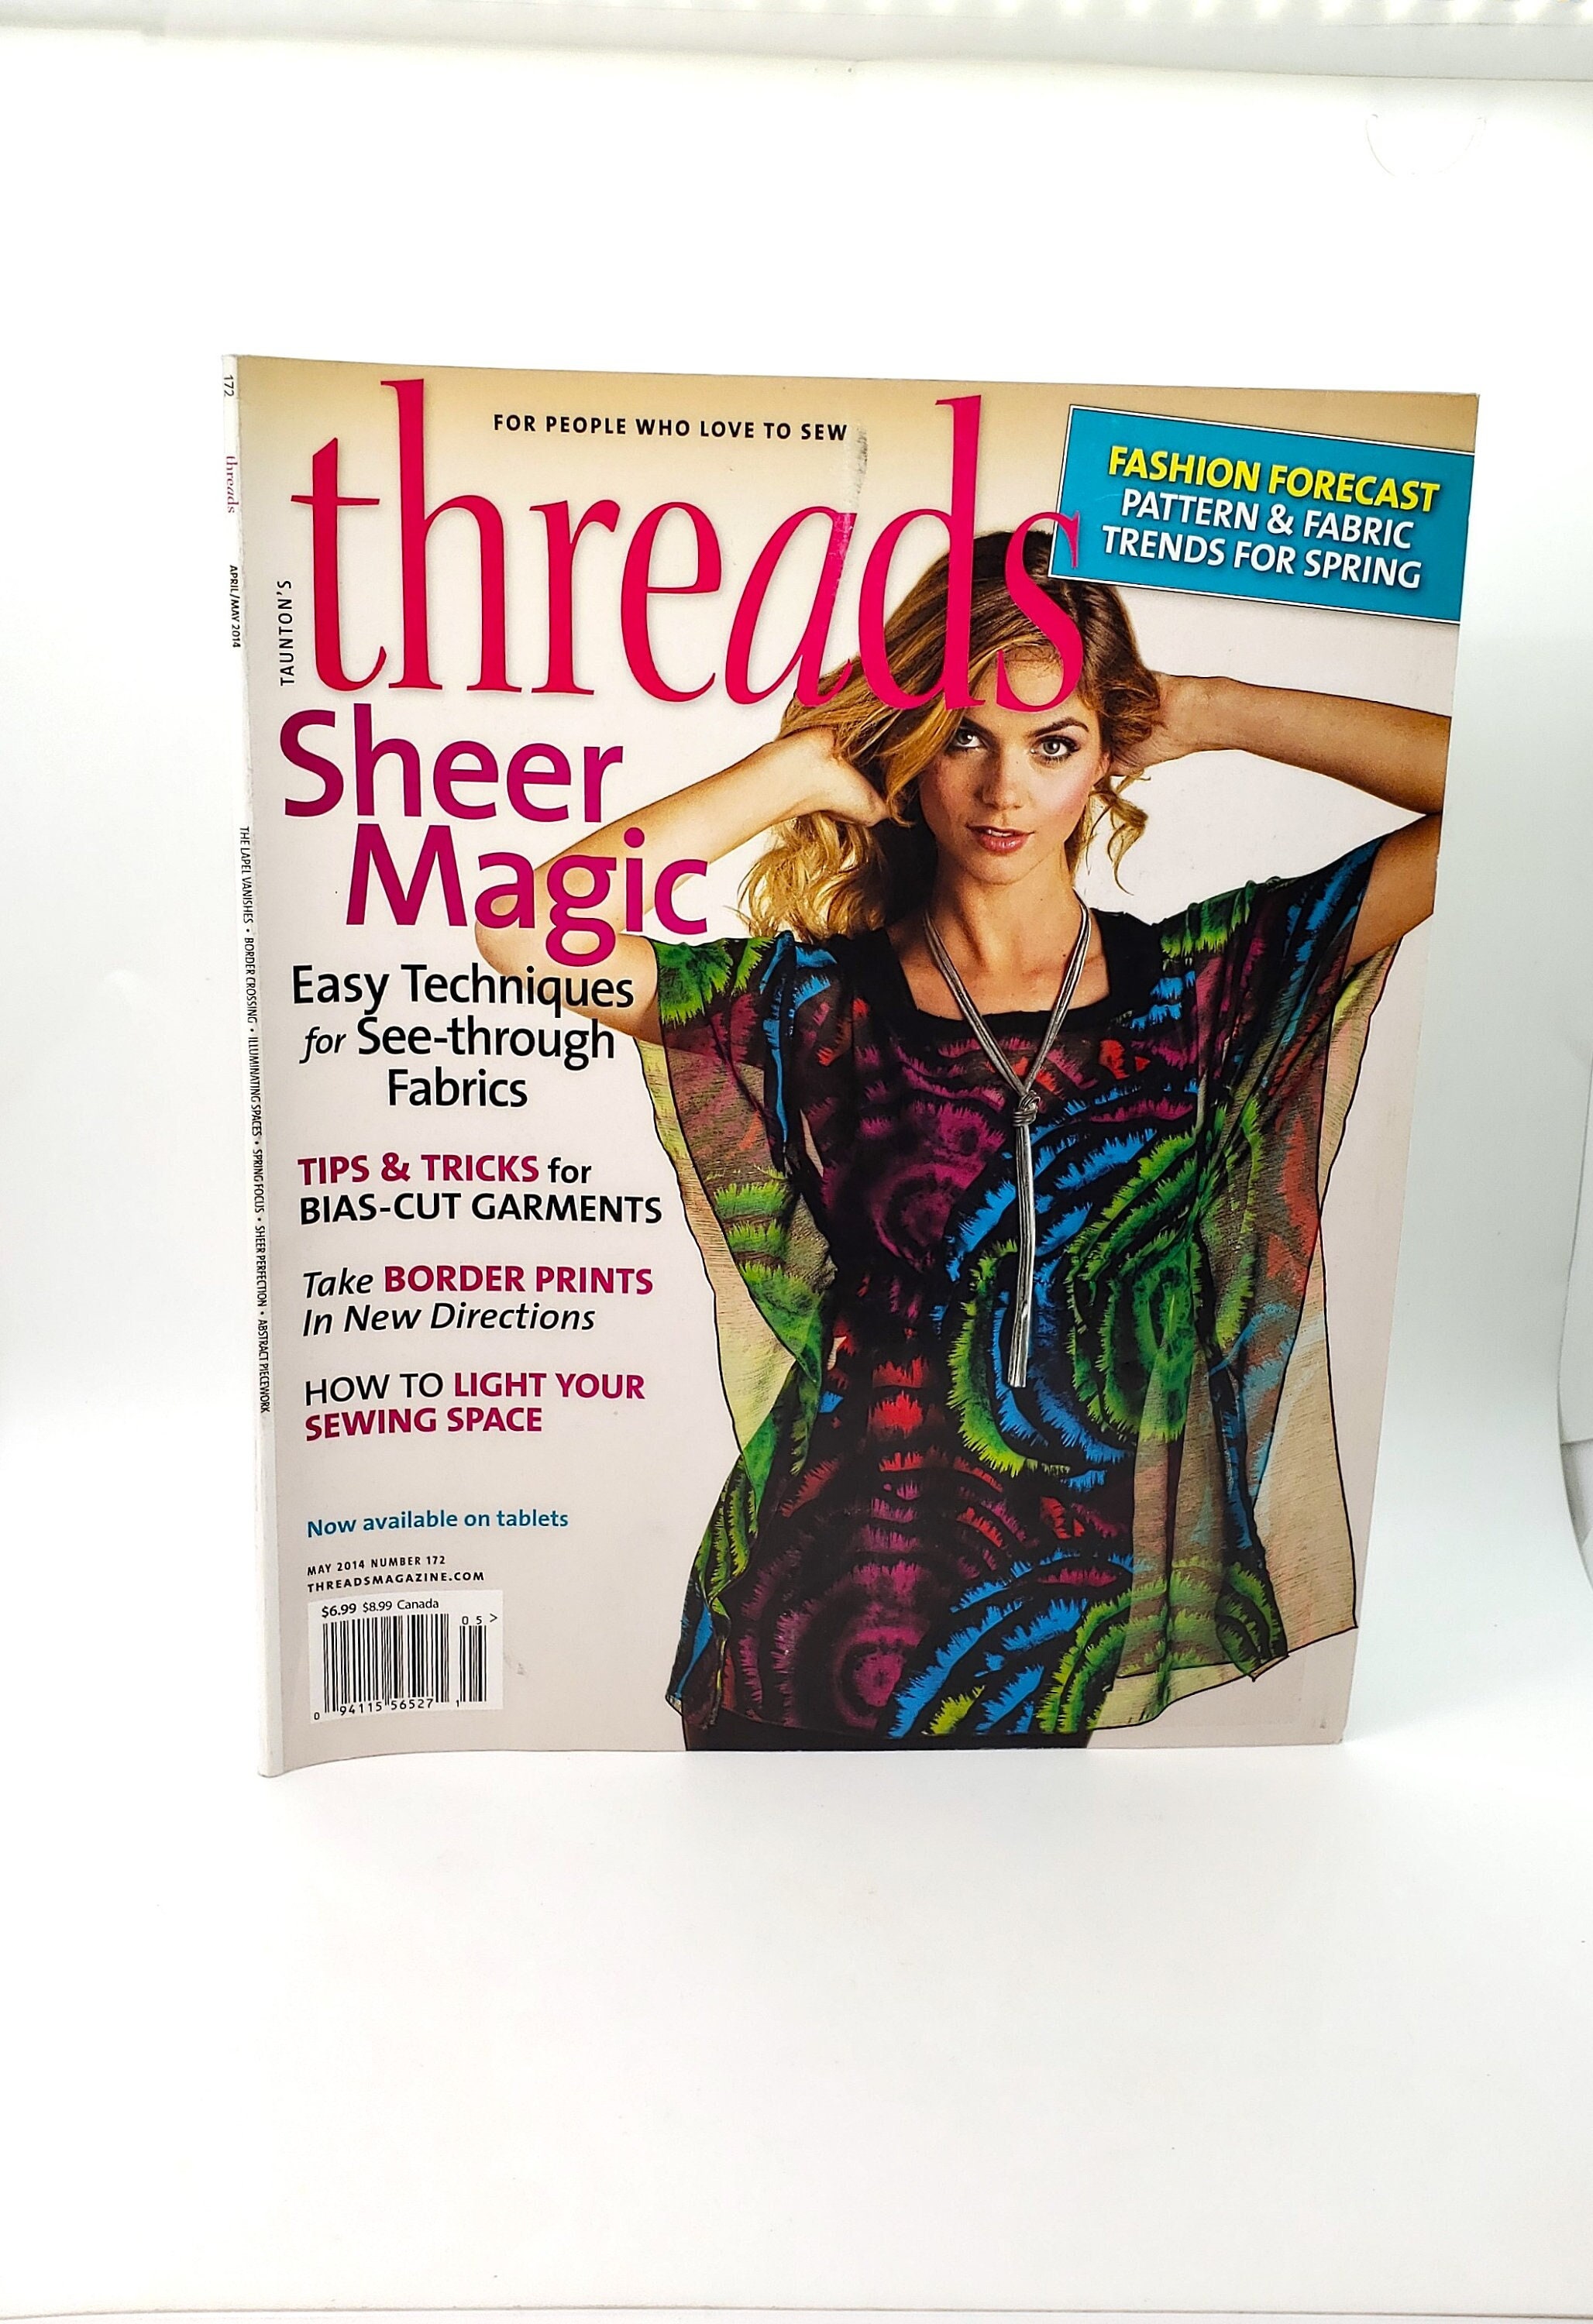 Sewing Tips from Threads Magazine Readers - Threads